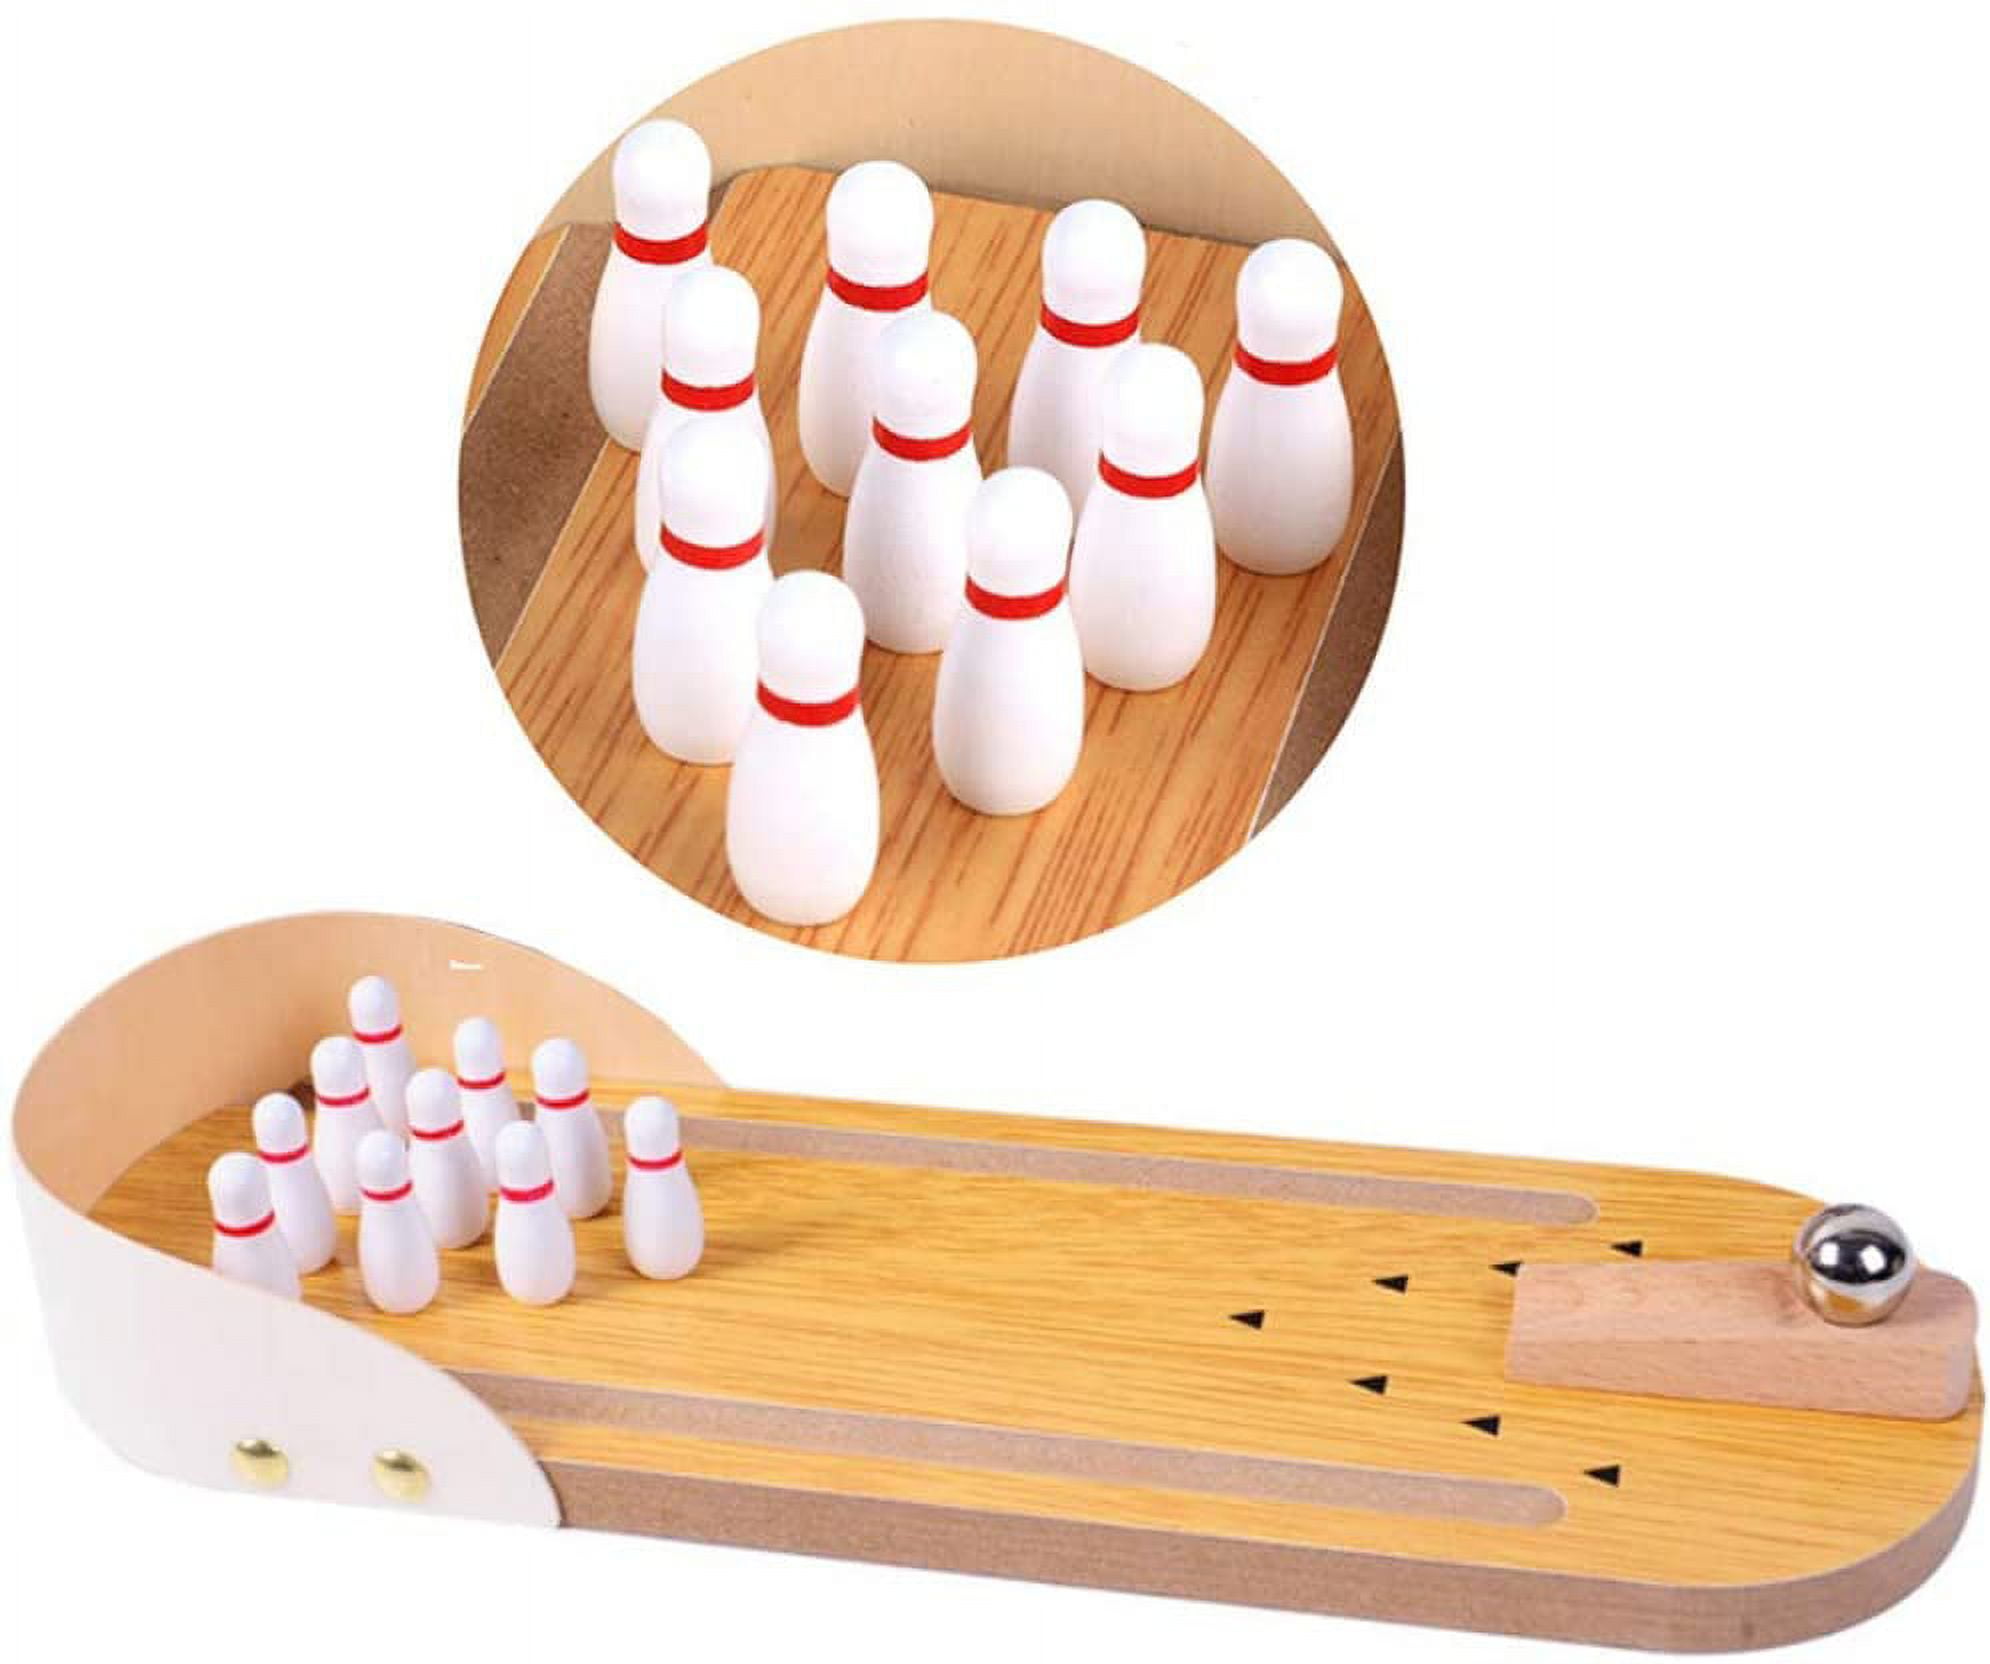 TORUBIA Mini Bowling Game Indoor Office Decorate Display Set Wooden Desktop Bowling Games for Kids and Adults Fun Party Favor Classic Desk Ball Best Game Ages 